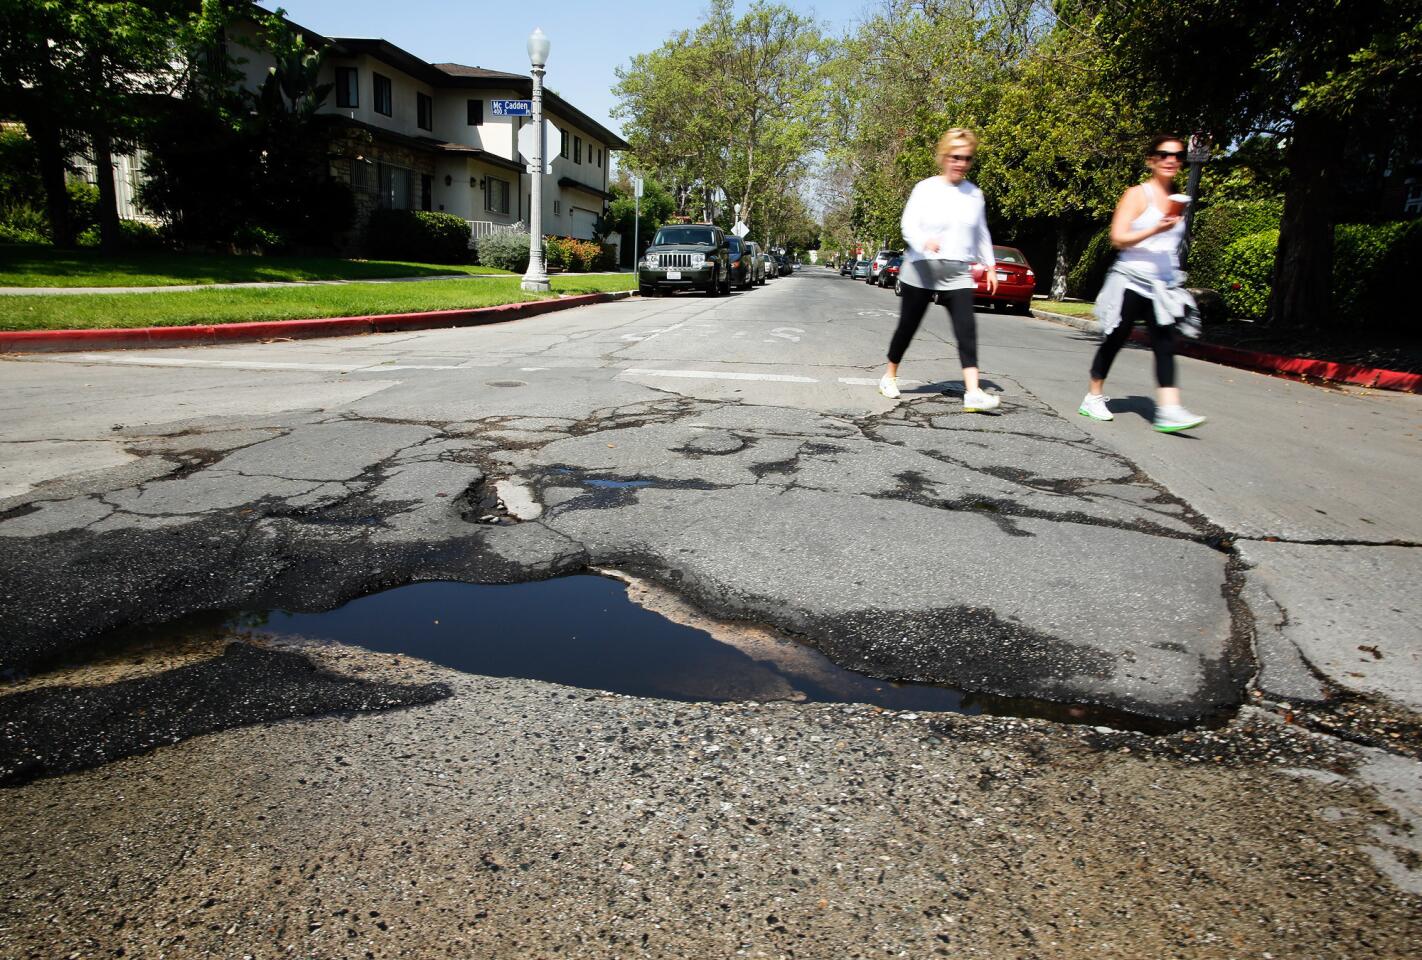 Pedestrians walk near a pothole in need of repair at the intersection of McCadden Place and 4th Street in the Hancock Park area of Los Angeles.